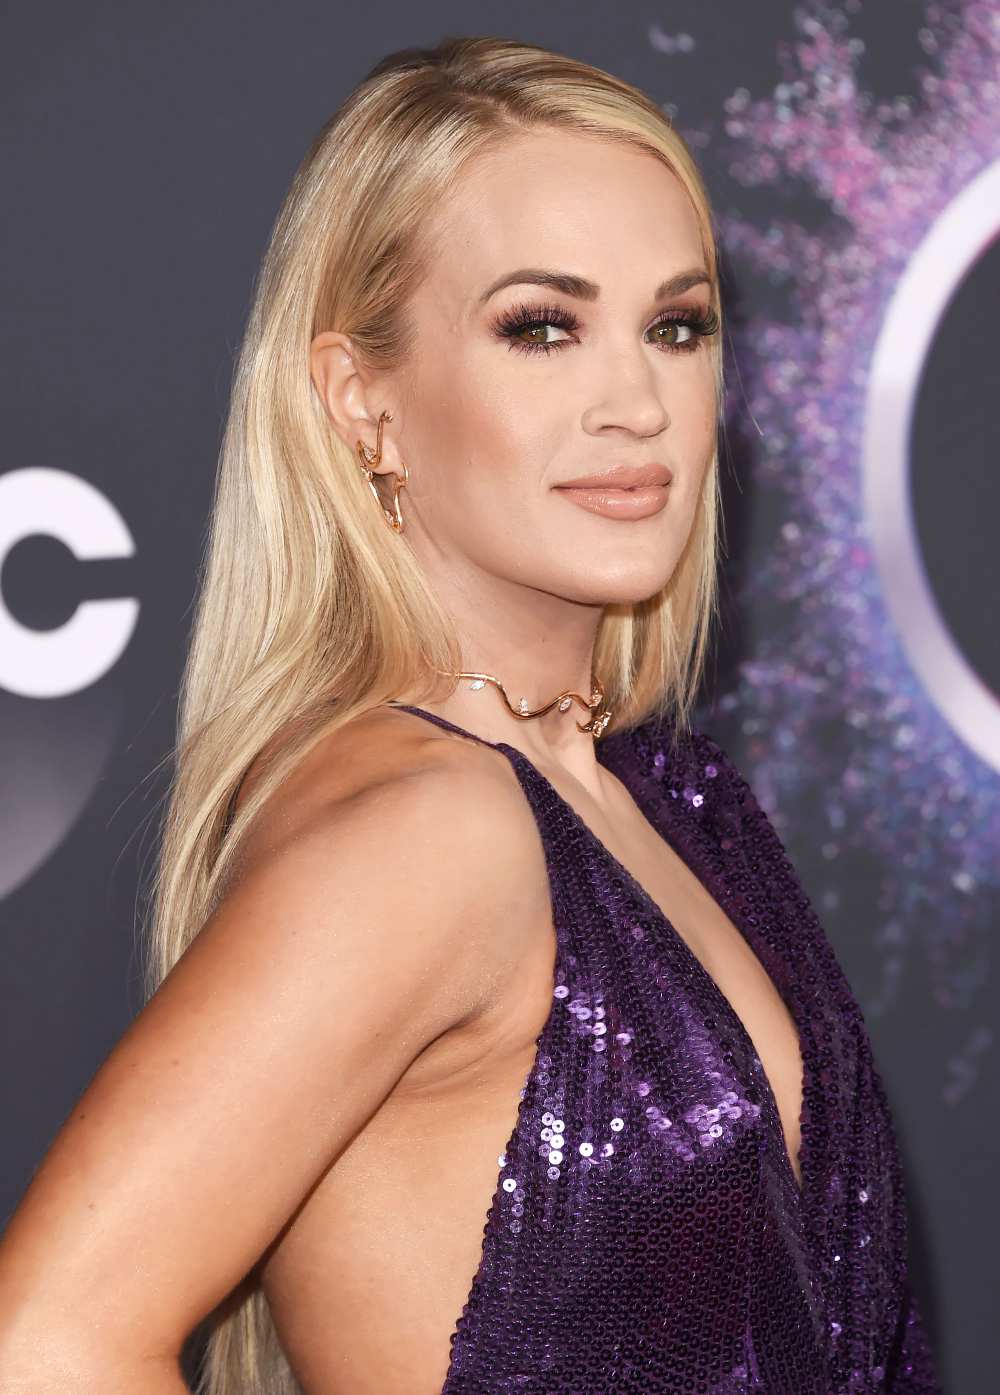 Carrie Underwood Gets a Haircut for the 1st Time in ‘6 Months’